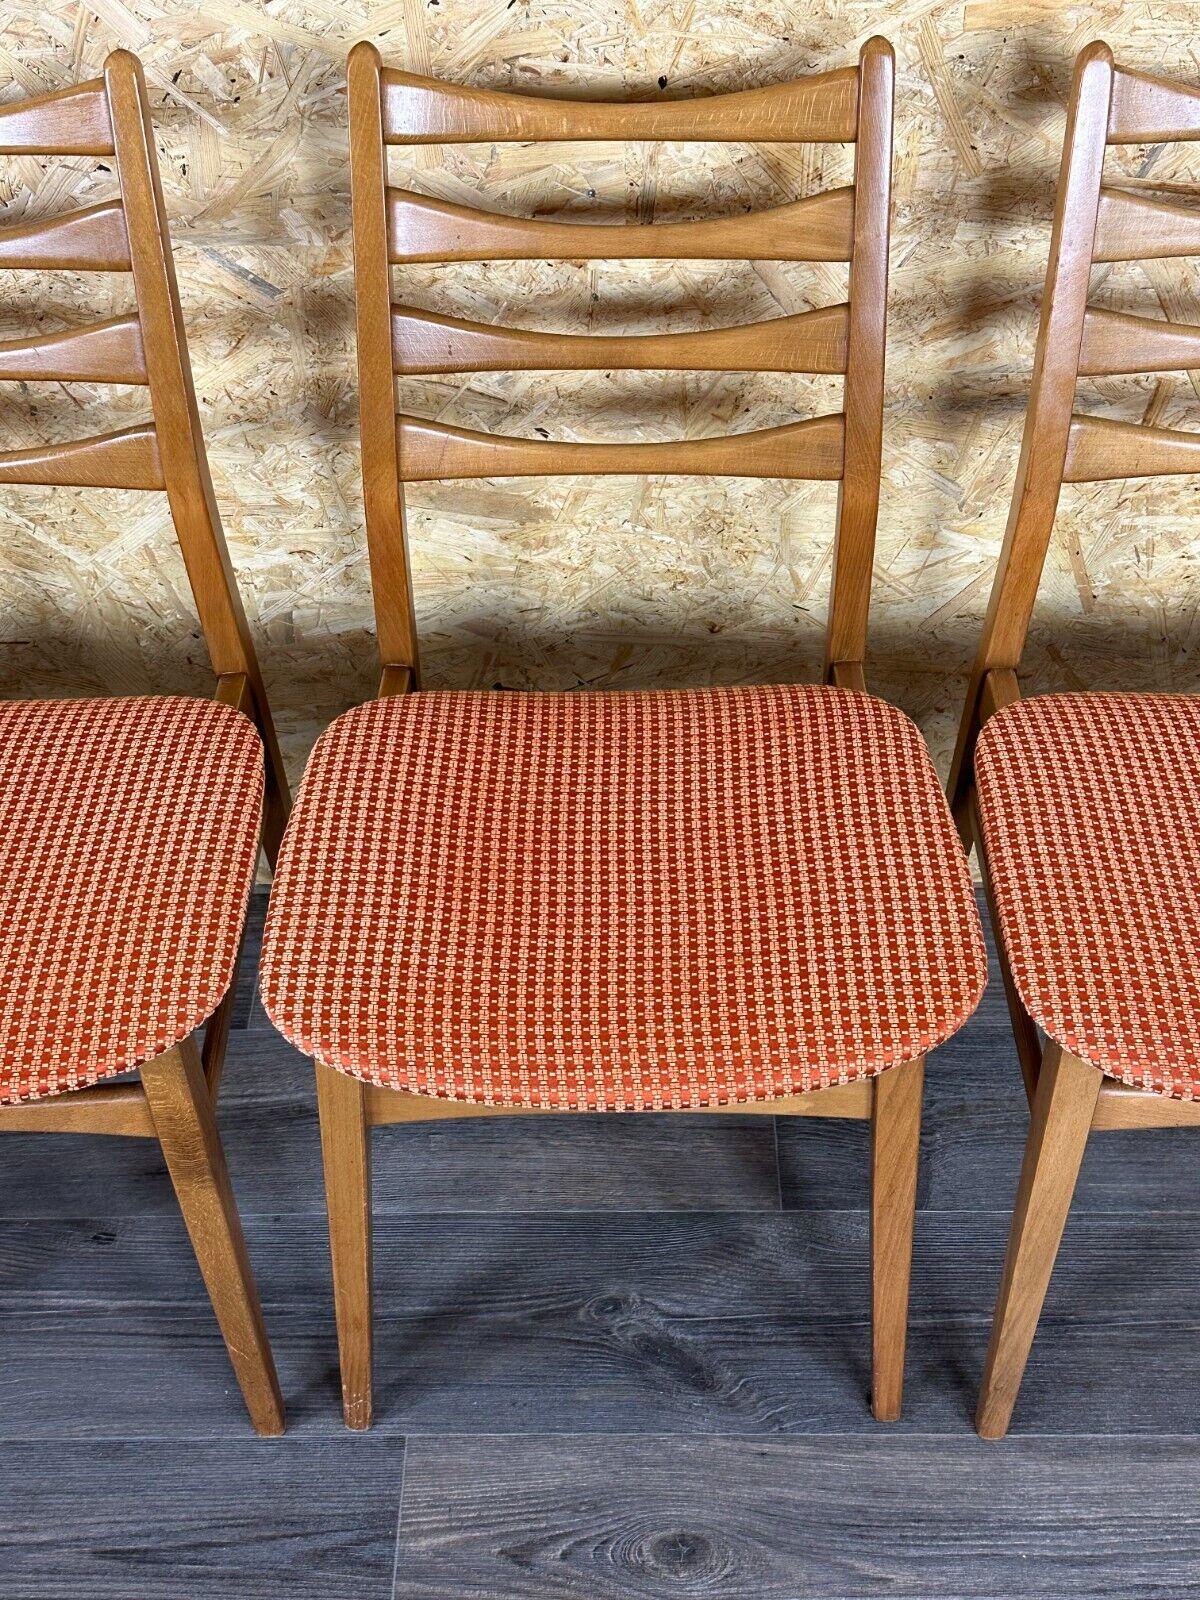 4x 60s 70s dining chair dining chair mid century Danish modern design For Sale 3